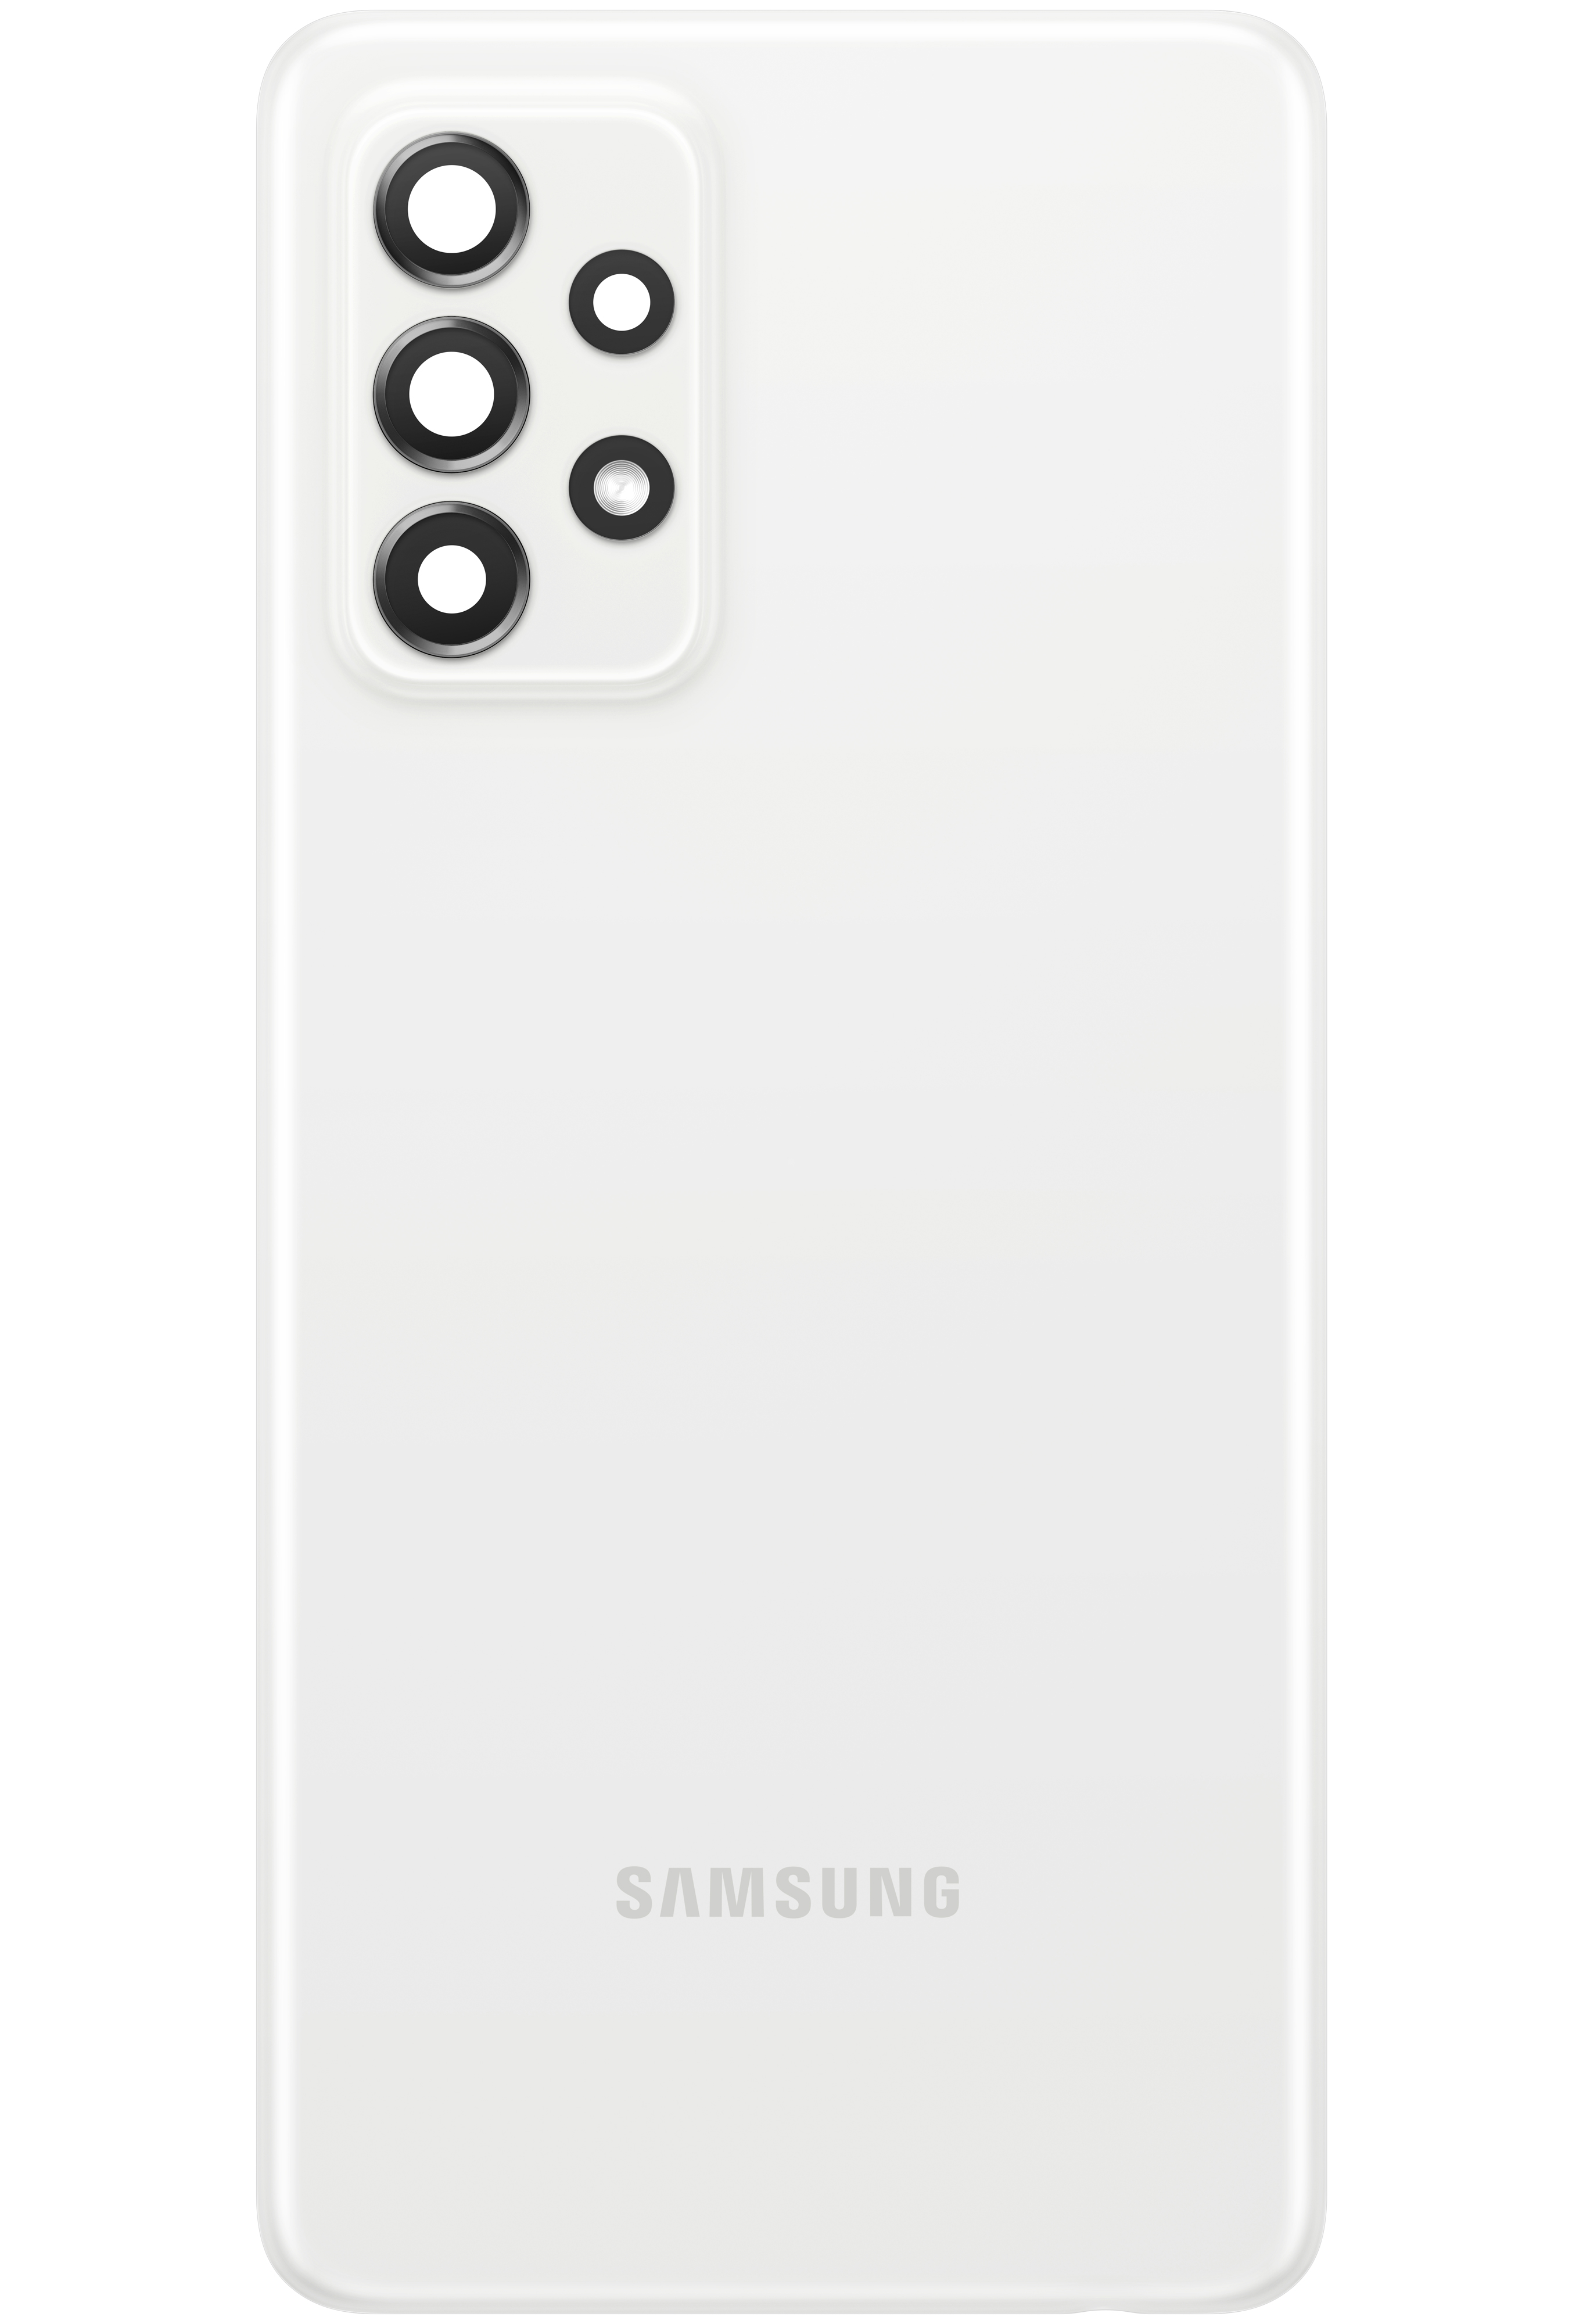 battery-cover-for-samsung-galaxy-a52-a525-awesome-white-gh82-25427d